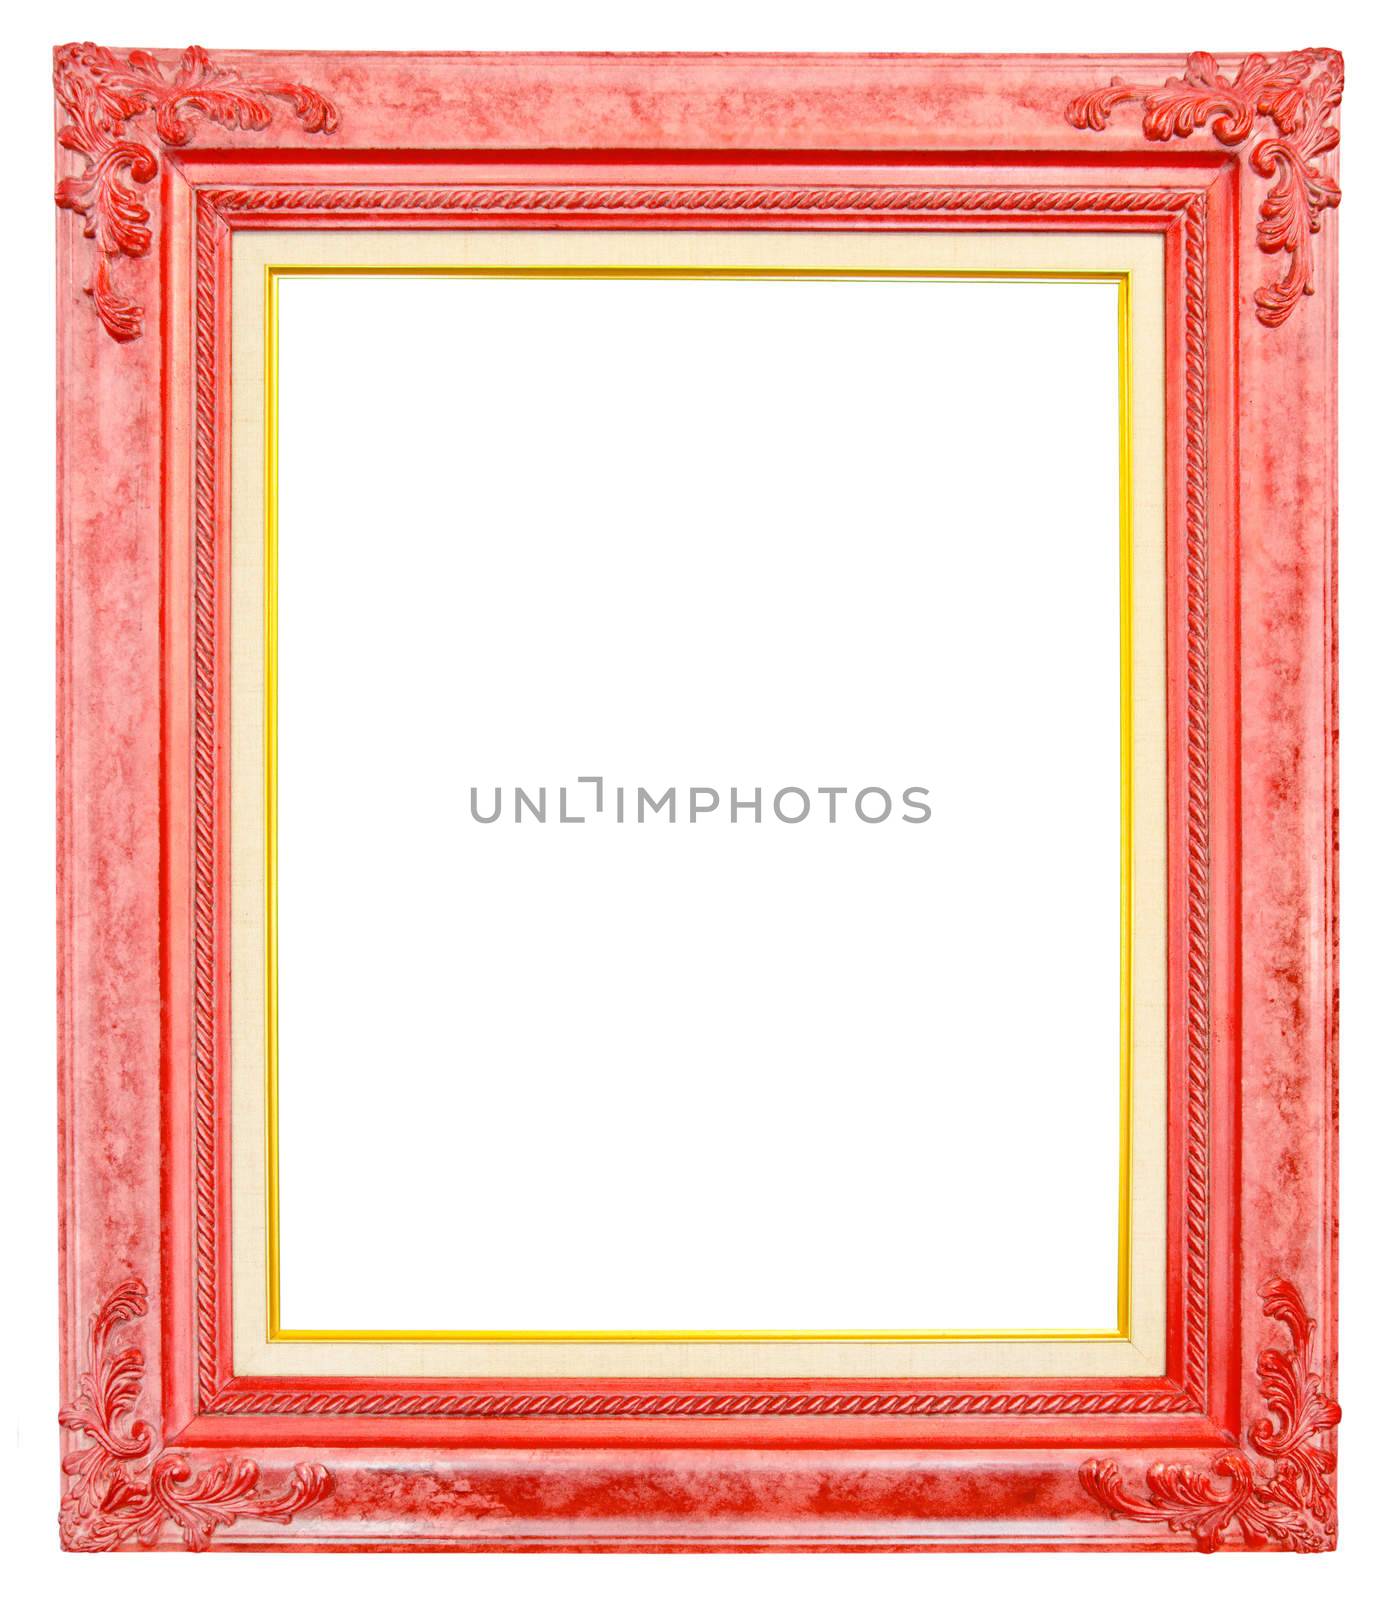 antique red frame isolated on white background by Gamjai